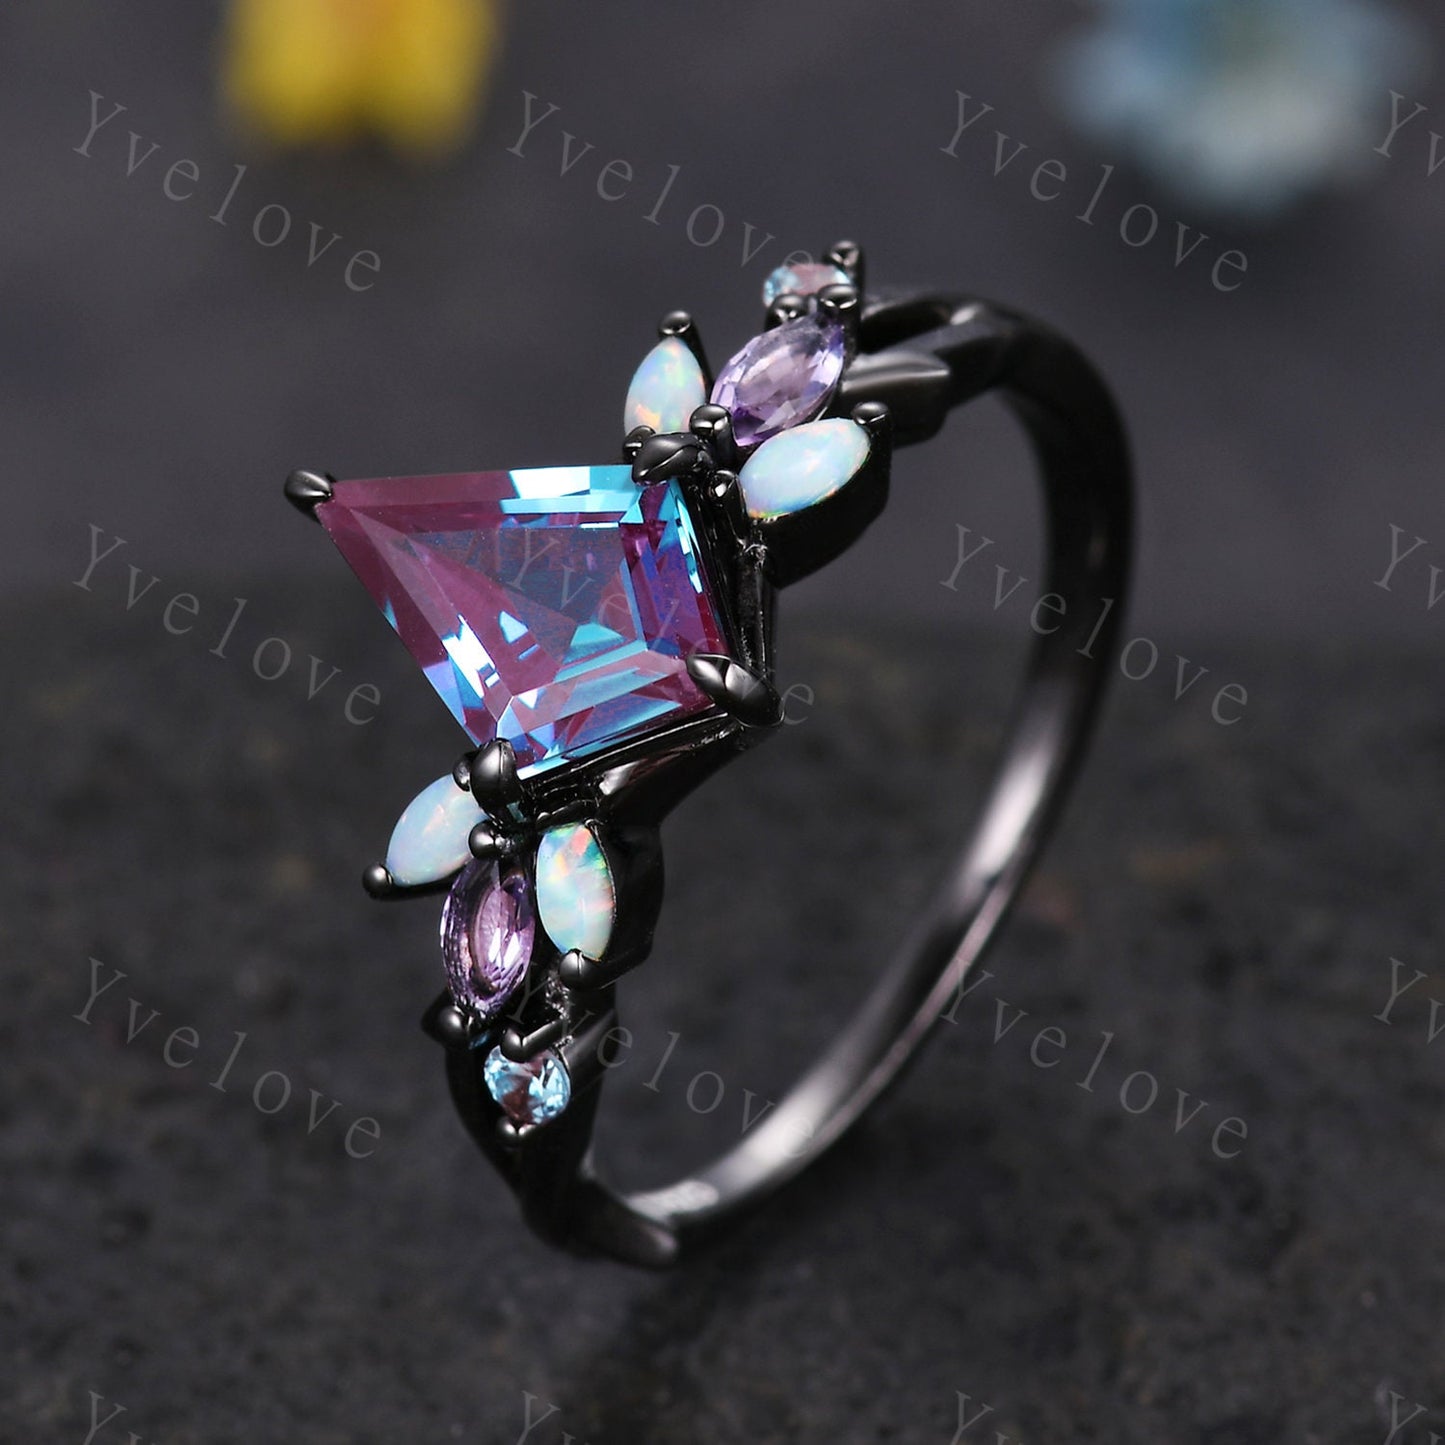 Vintage Kite Alexandrite Engagement Ring,Black Gold,Vines Amethyst Opal Ring,Unique Matching Band Promise Bridal Stacking Ring Gift for her